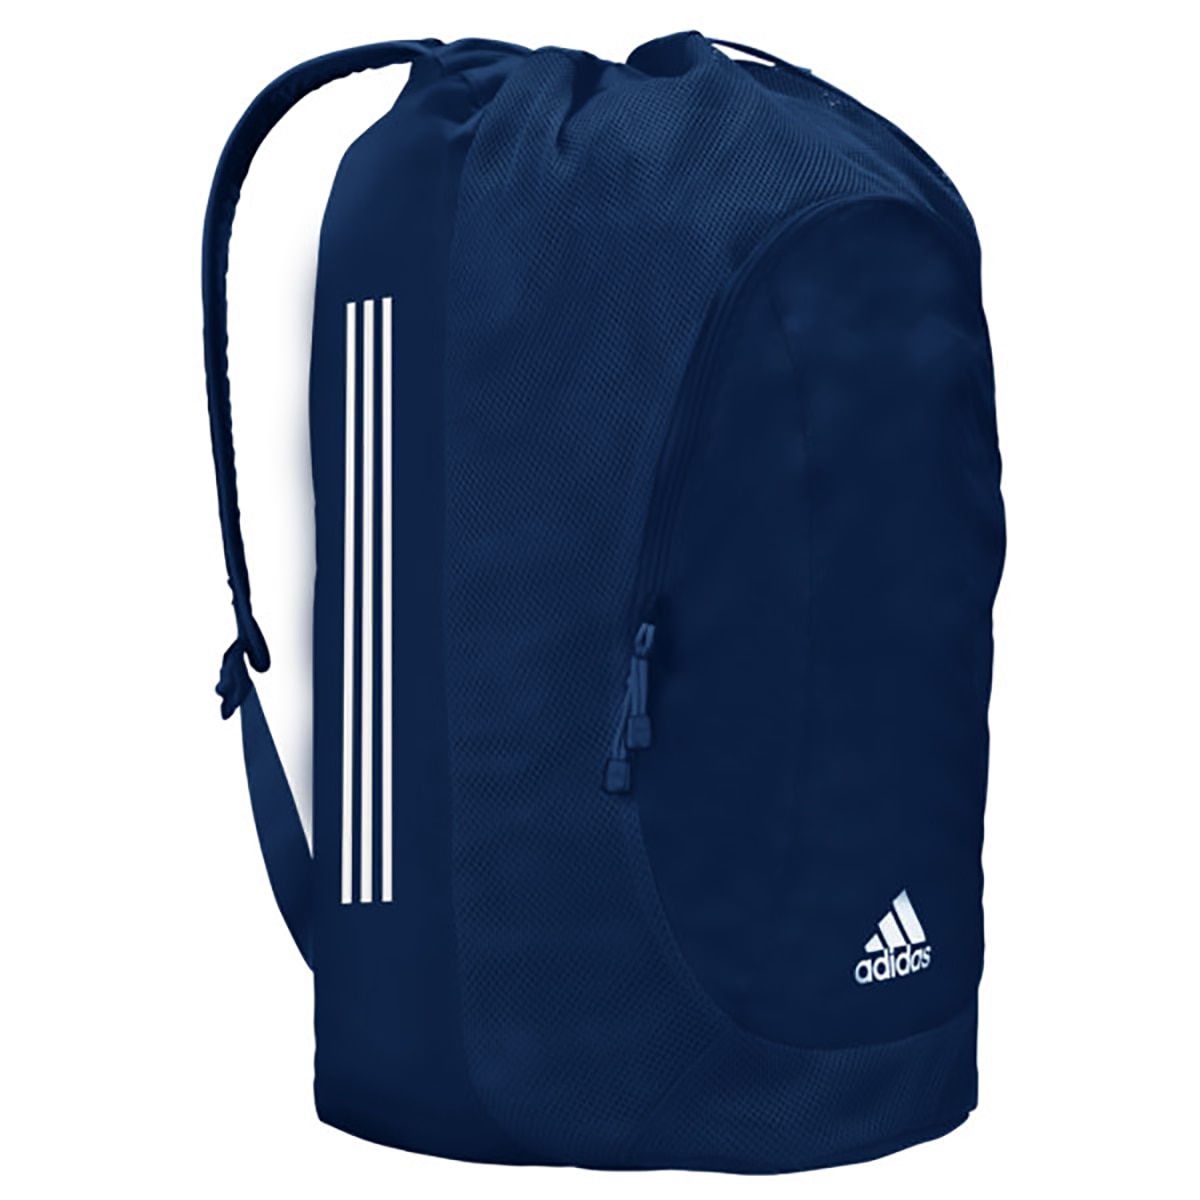 Adidas Wrestling Gear Bag 2.0 A514720 - Various Colors - image 1 of 4